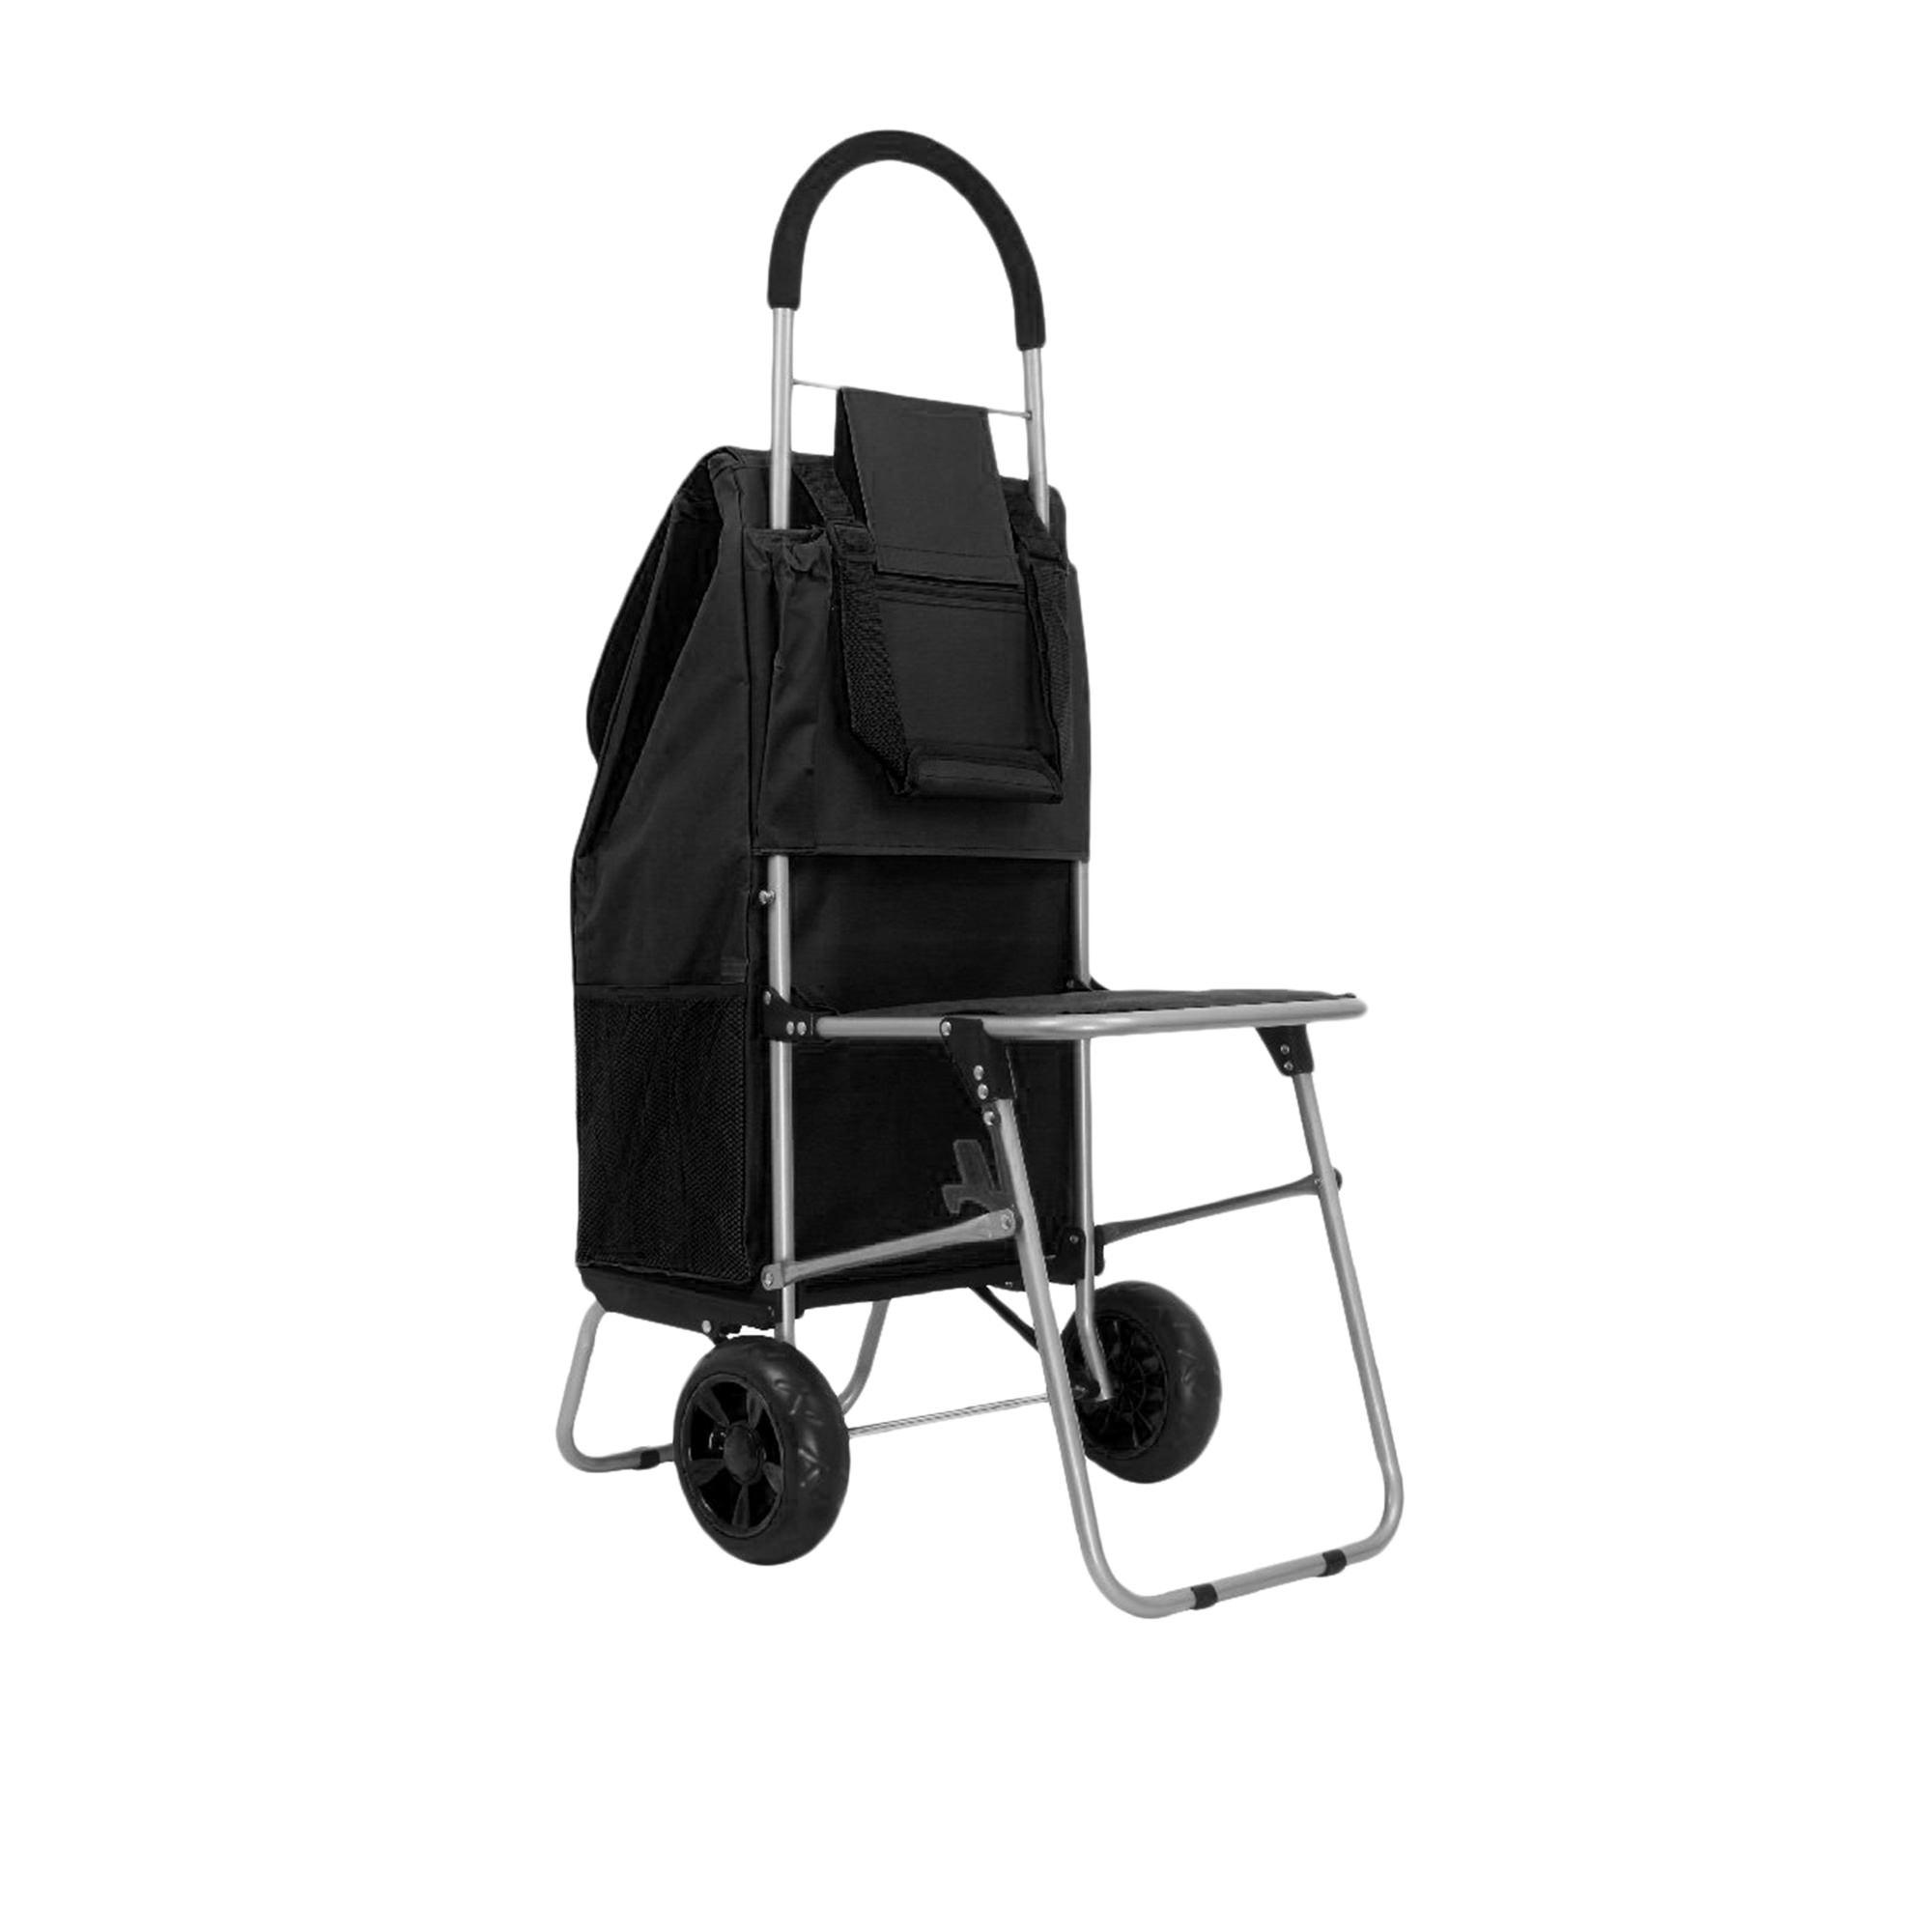 White Magic Handy Trolley with Seat Black Image 4